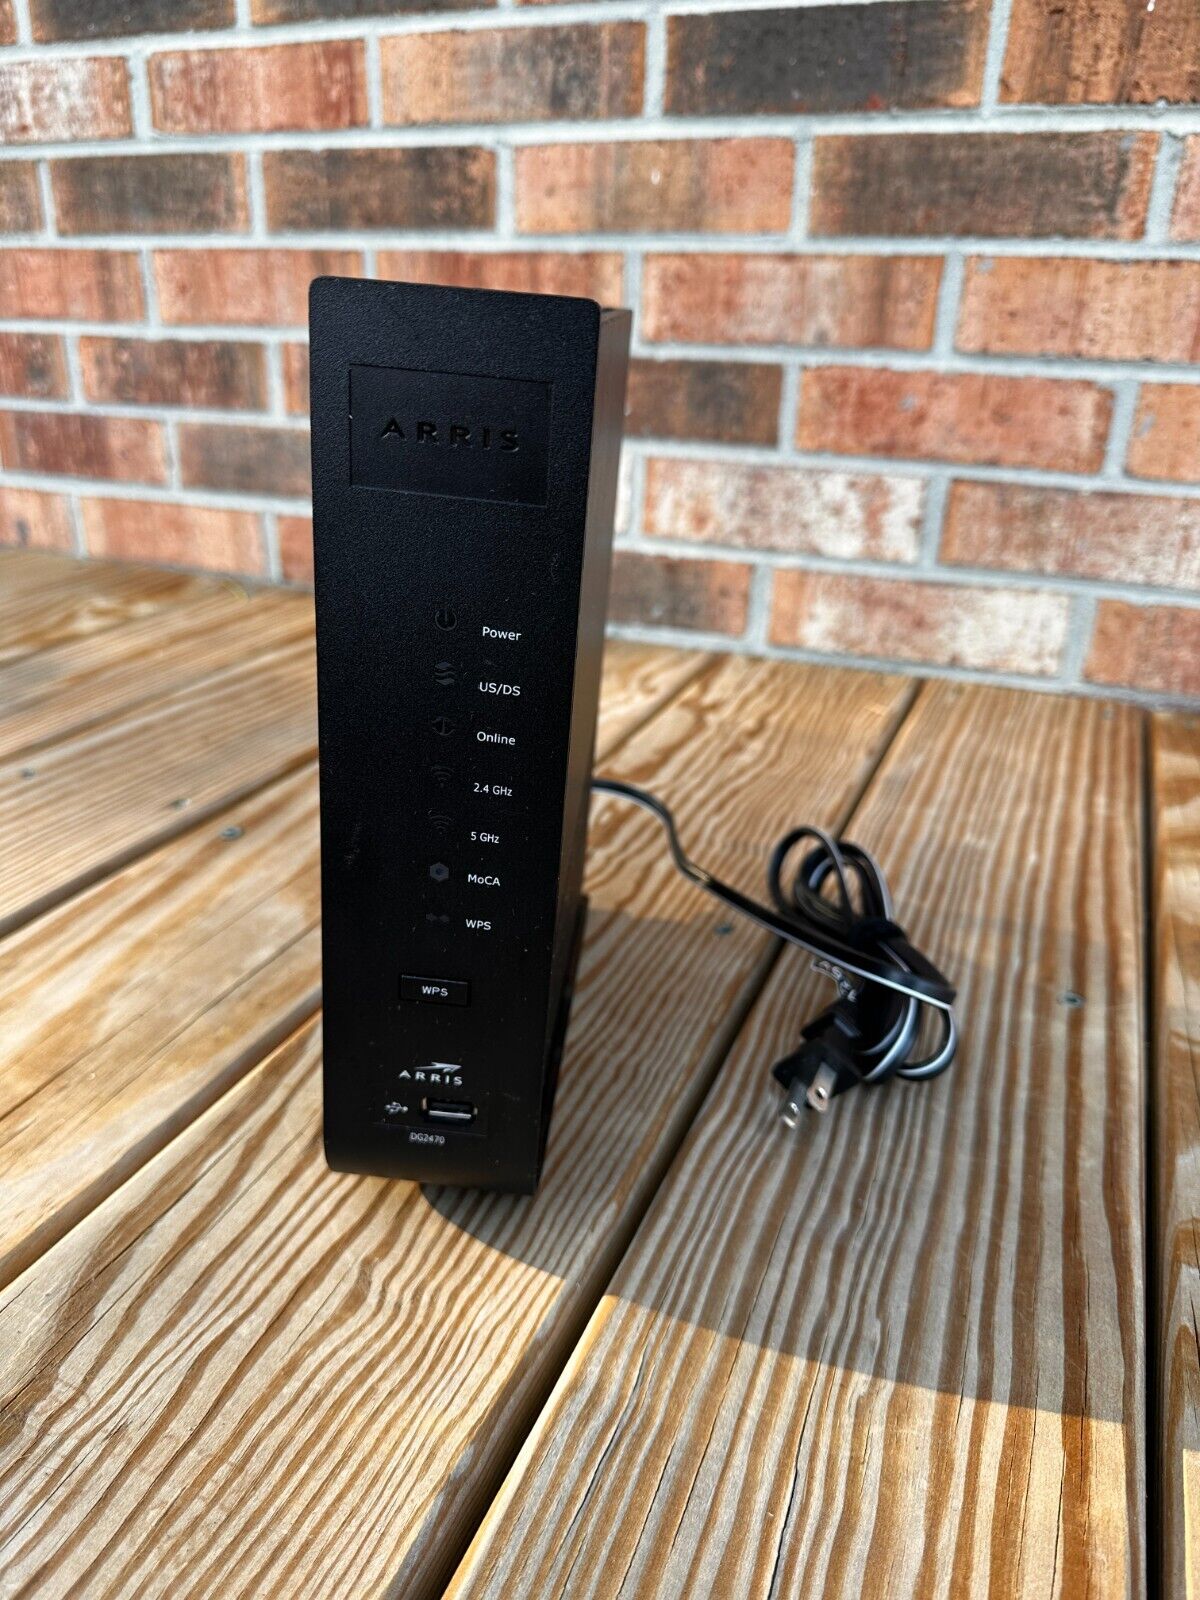 ARRIS DG2470A Dual Band Wireless DOCSIS 3.0 Cable Modem WIFI Router w/power cord